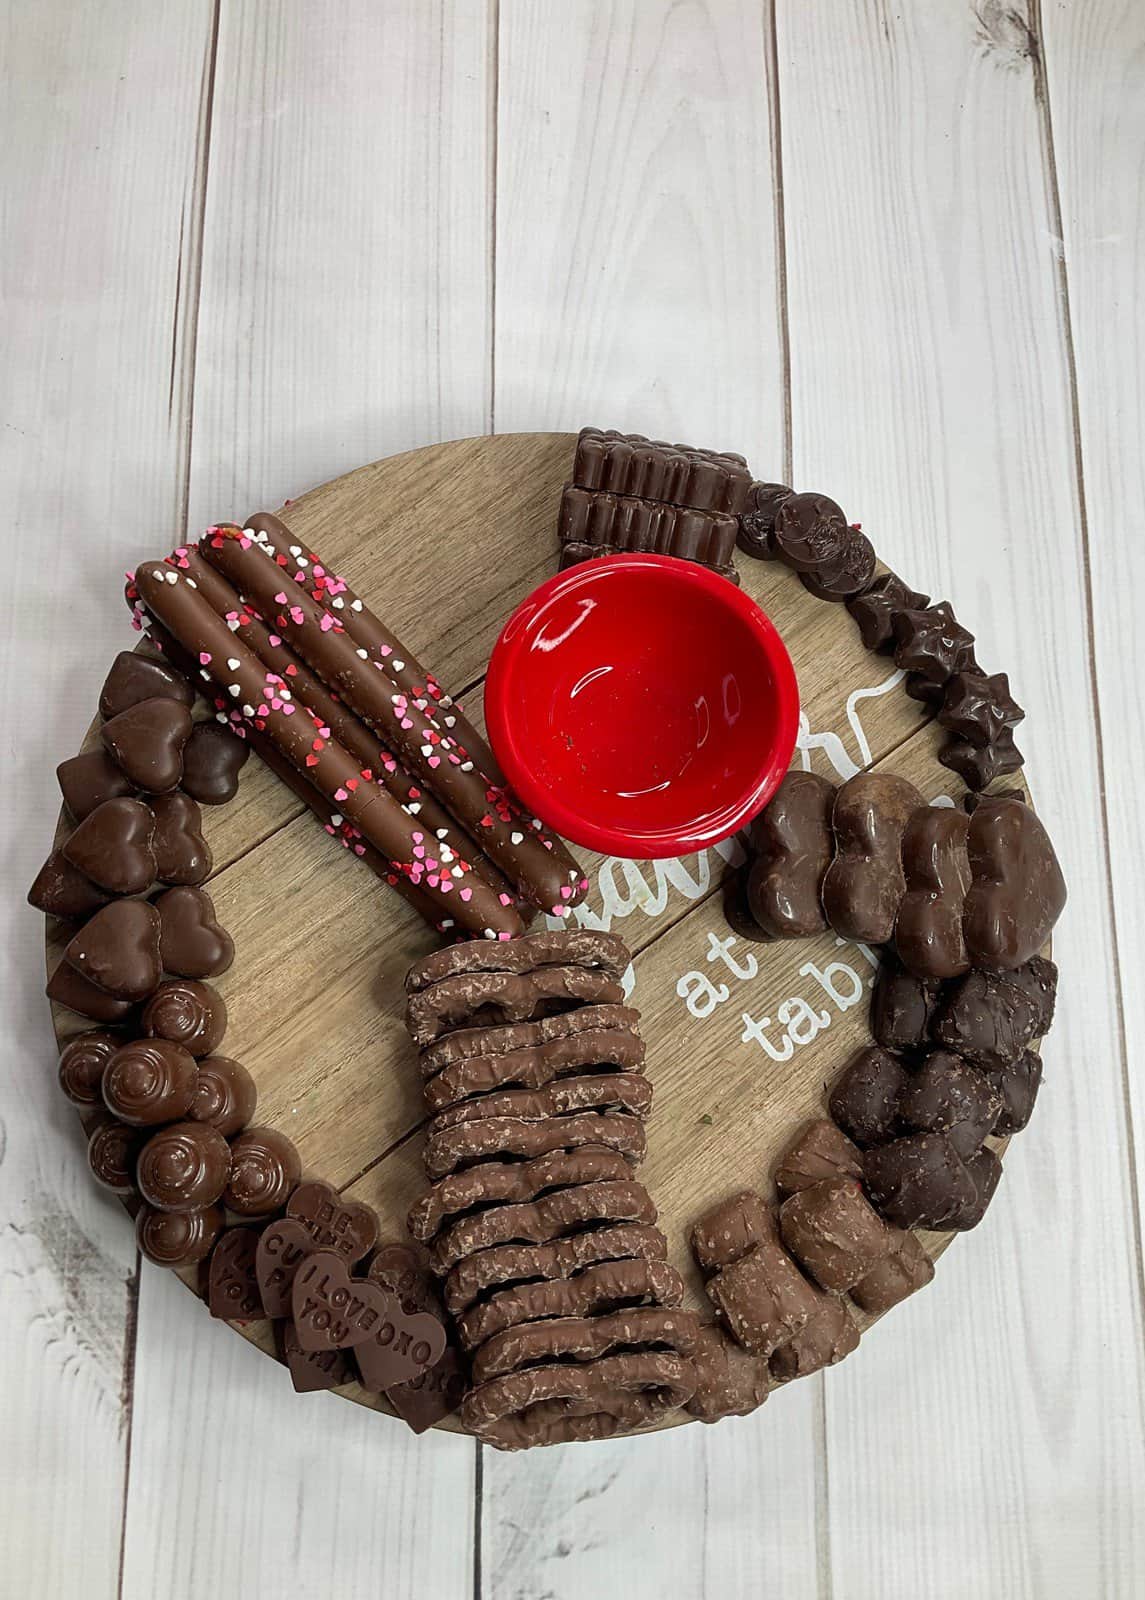 Above view showing round board with chocolate pretzels and hearts on board with red empty bowl.